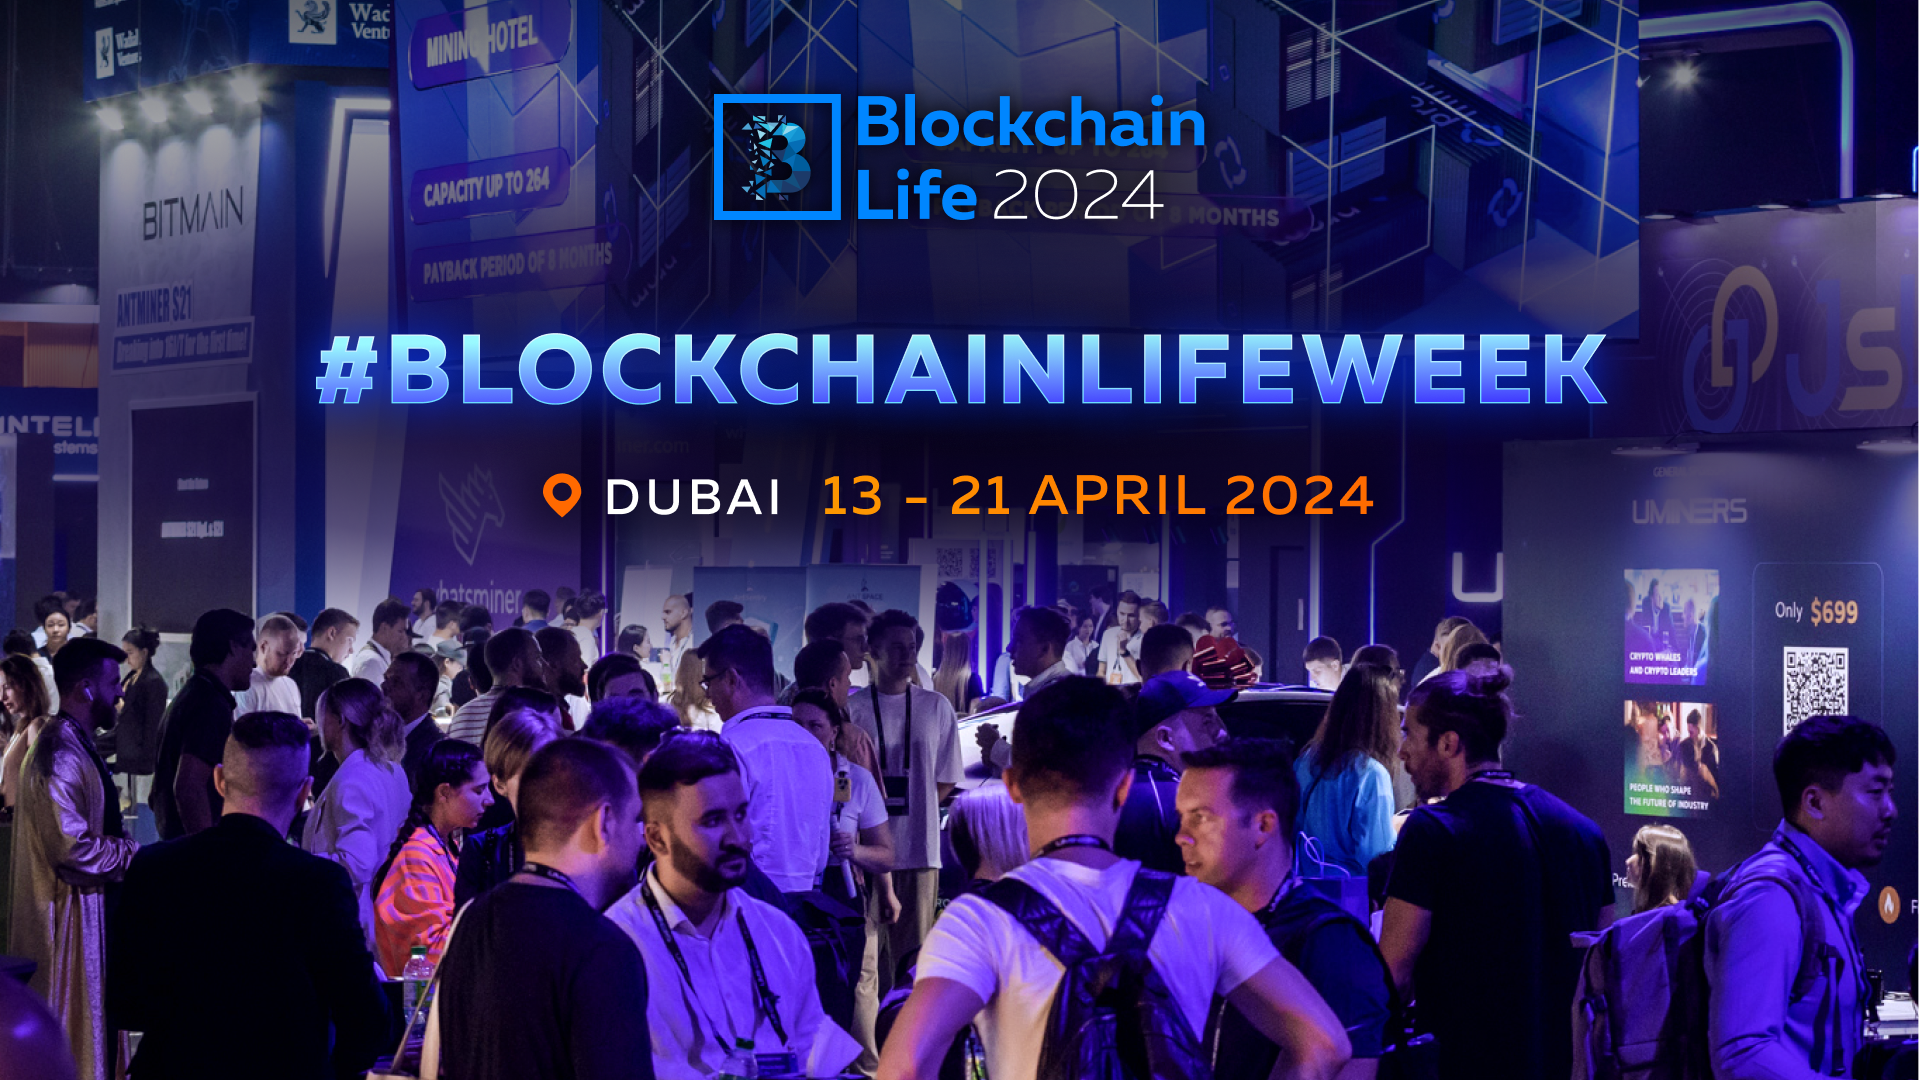 Blockchain Life Week in Dubai: we have never seen this before